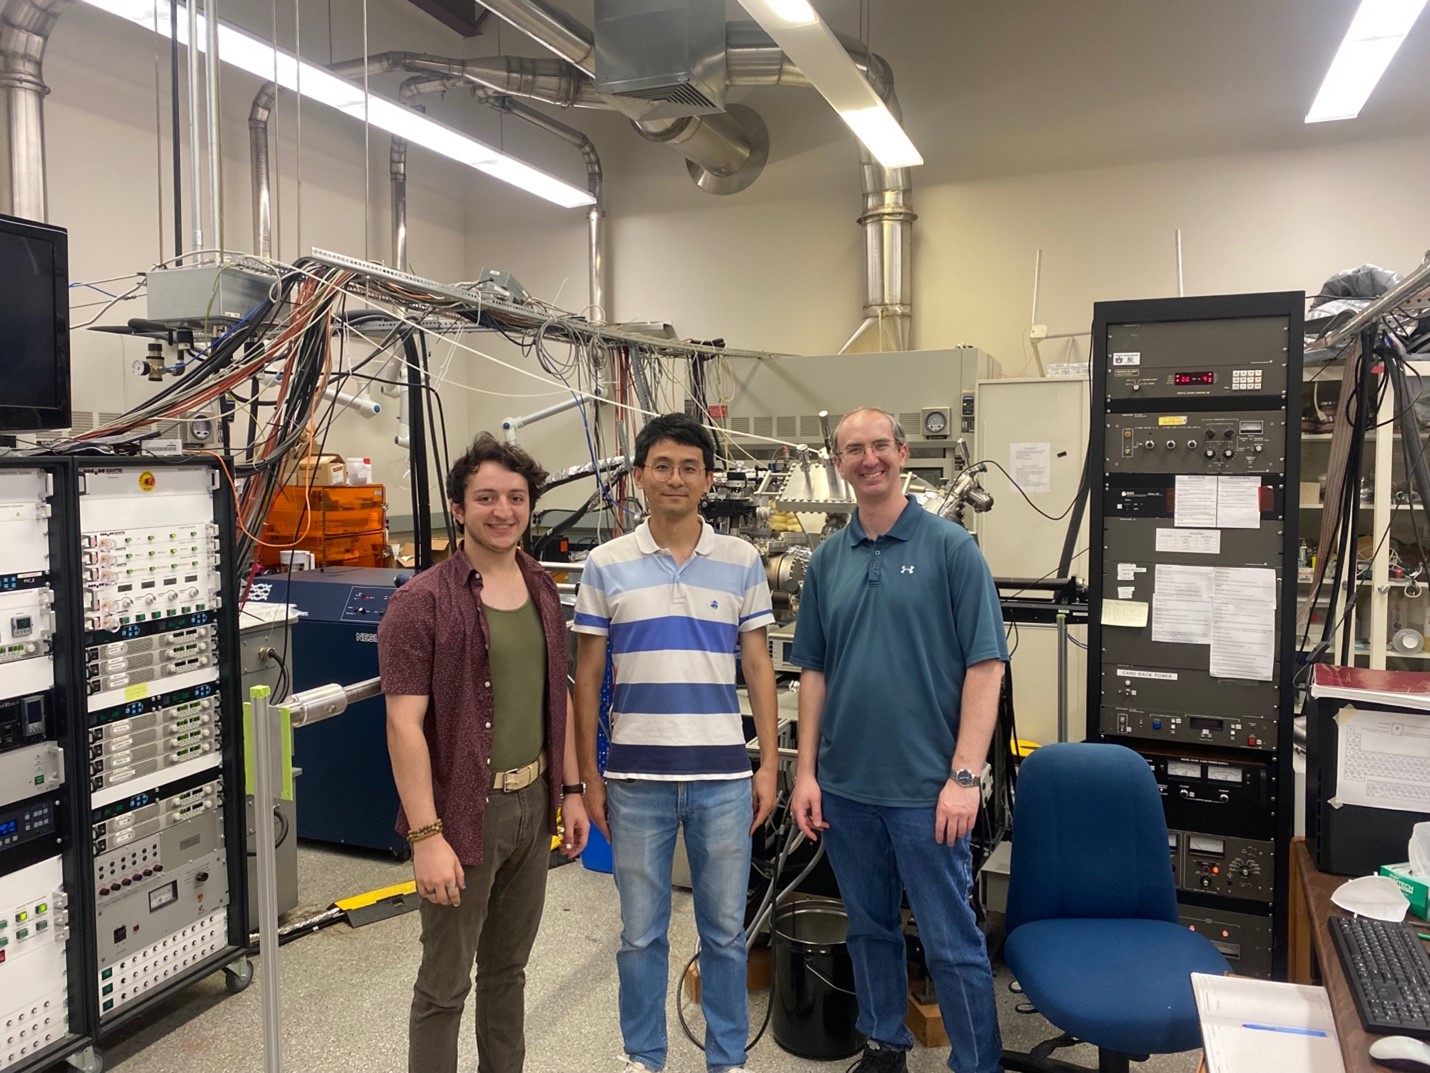 Dr. Jin (middle) and Dr. Comes (right) in the oxide synthesis lab with graduate student Hussam Mustafa (left).